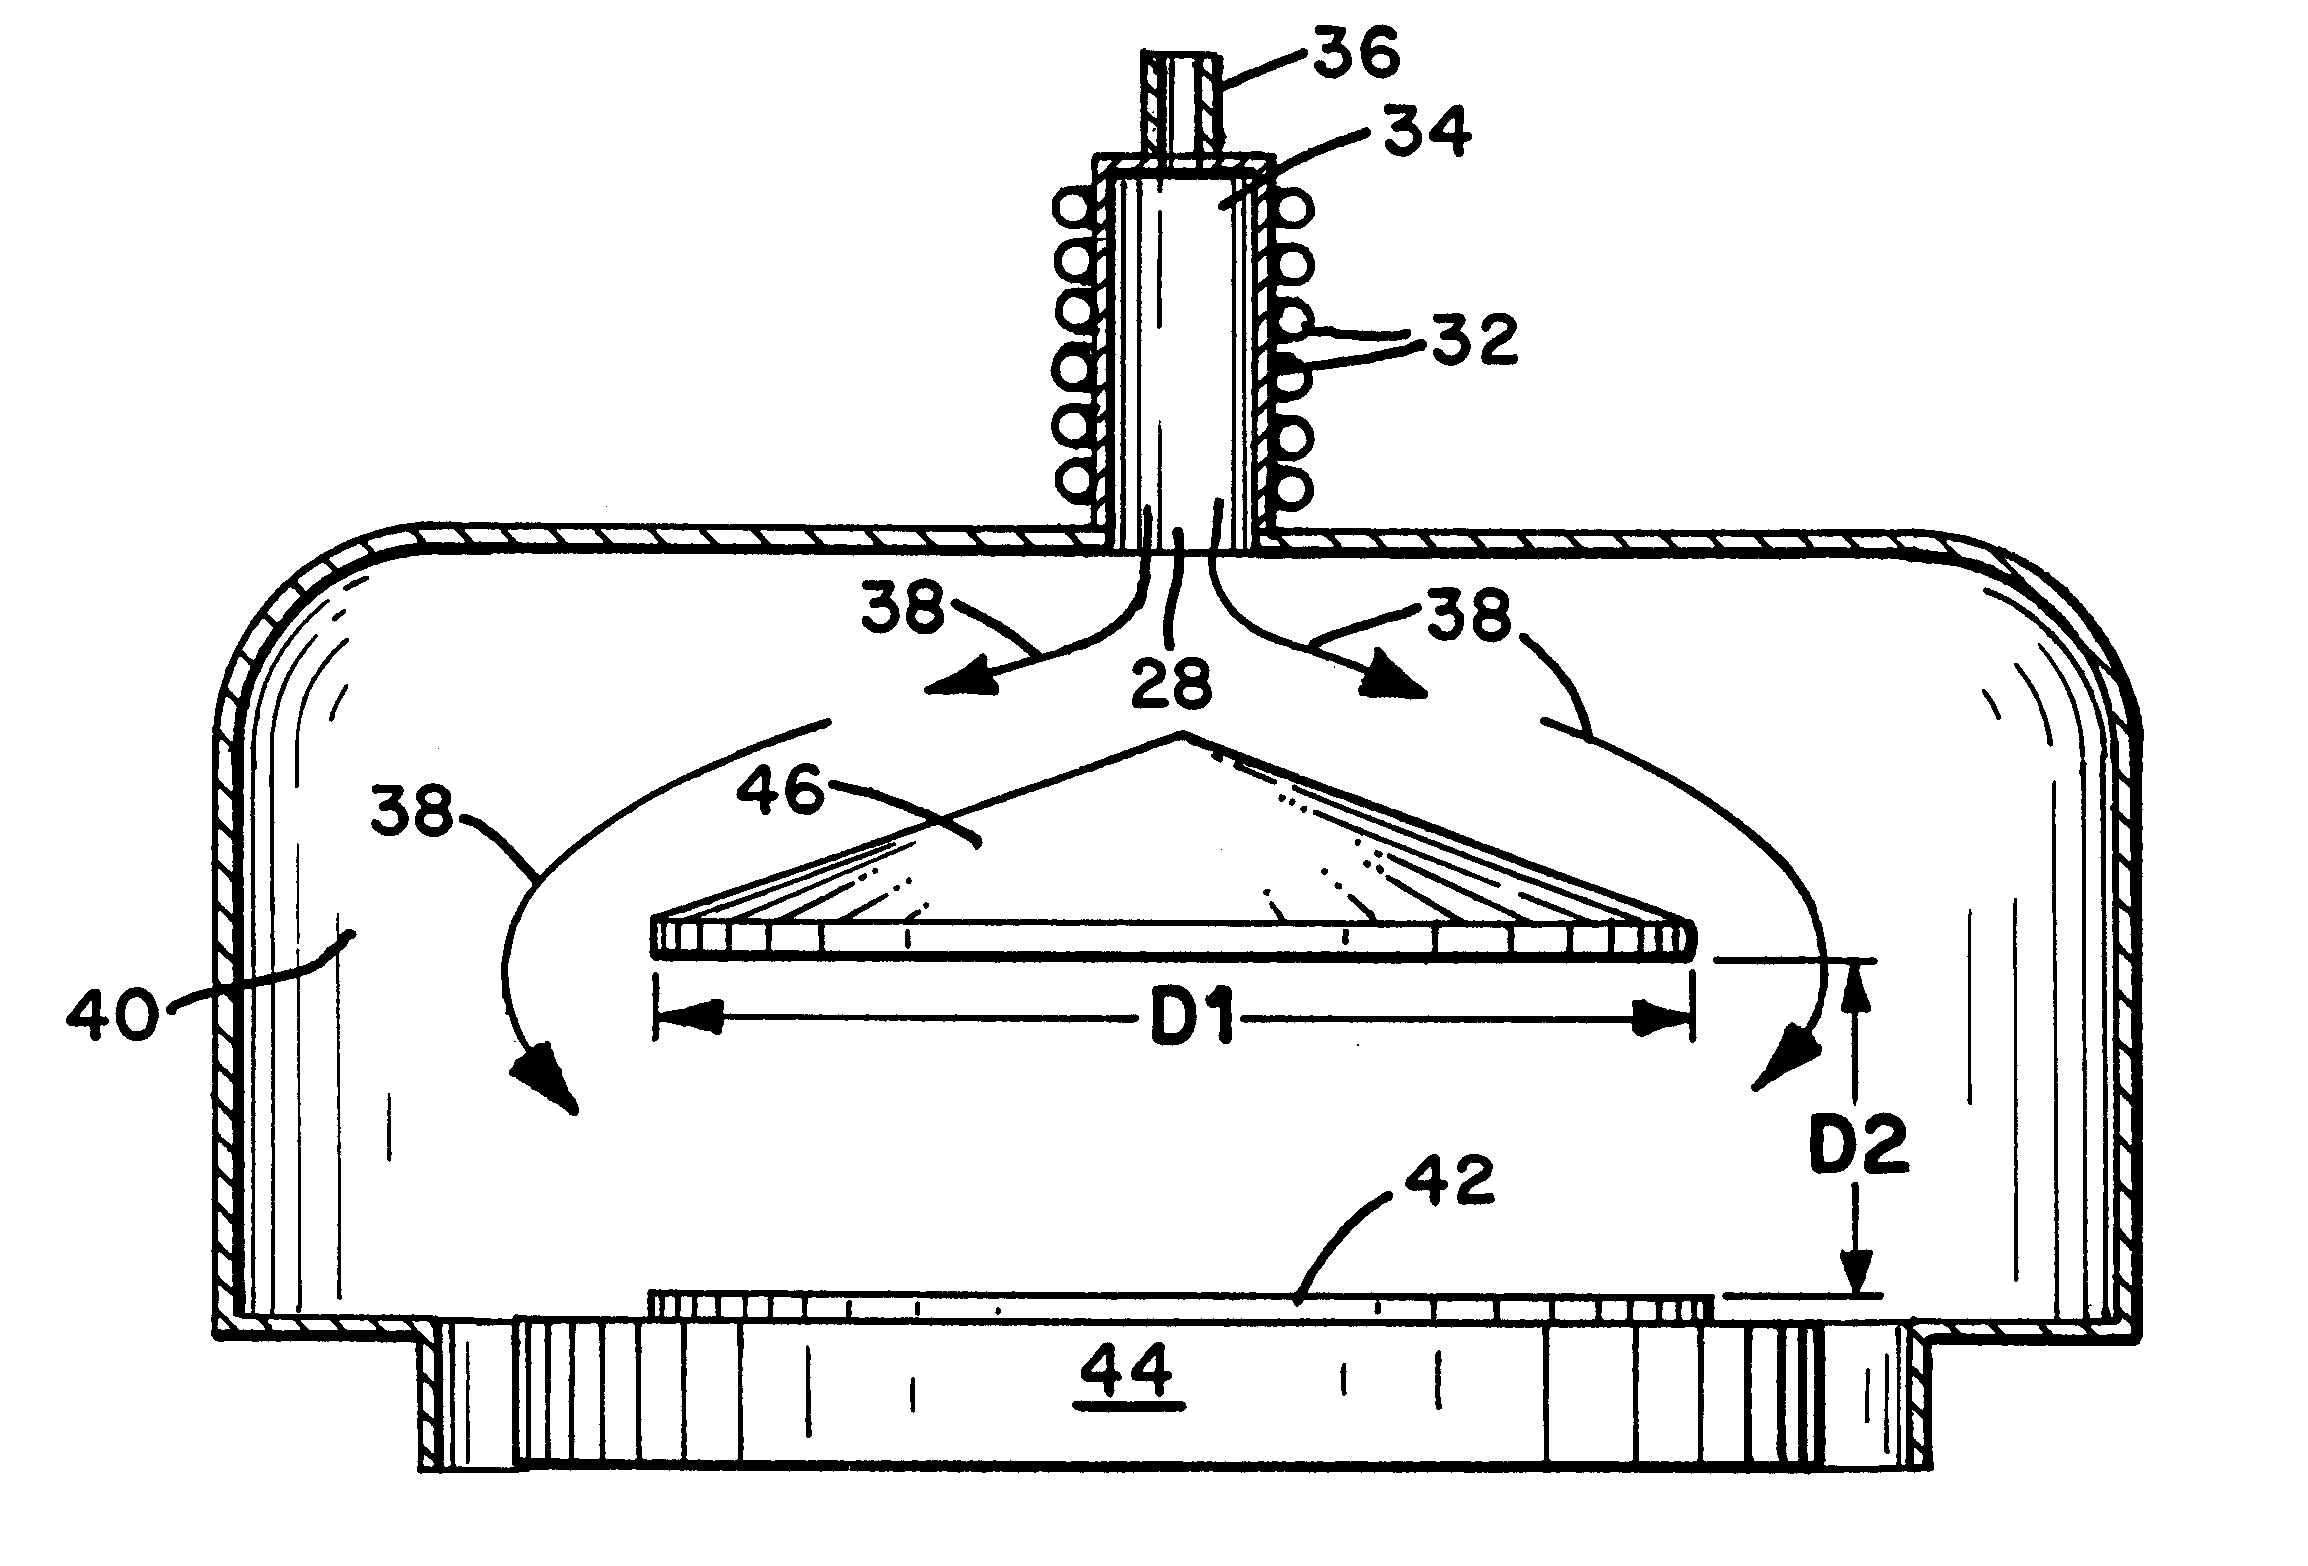 Apparatus and method for injecting and modifying gas concentration of a meta-stable or atomic species in a downstream plasma reactor